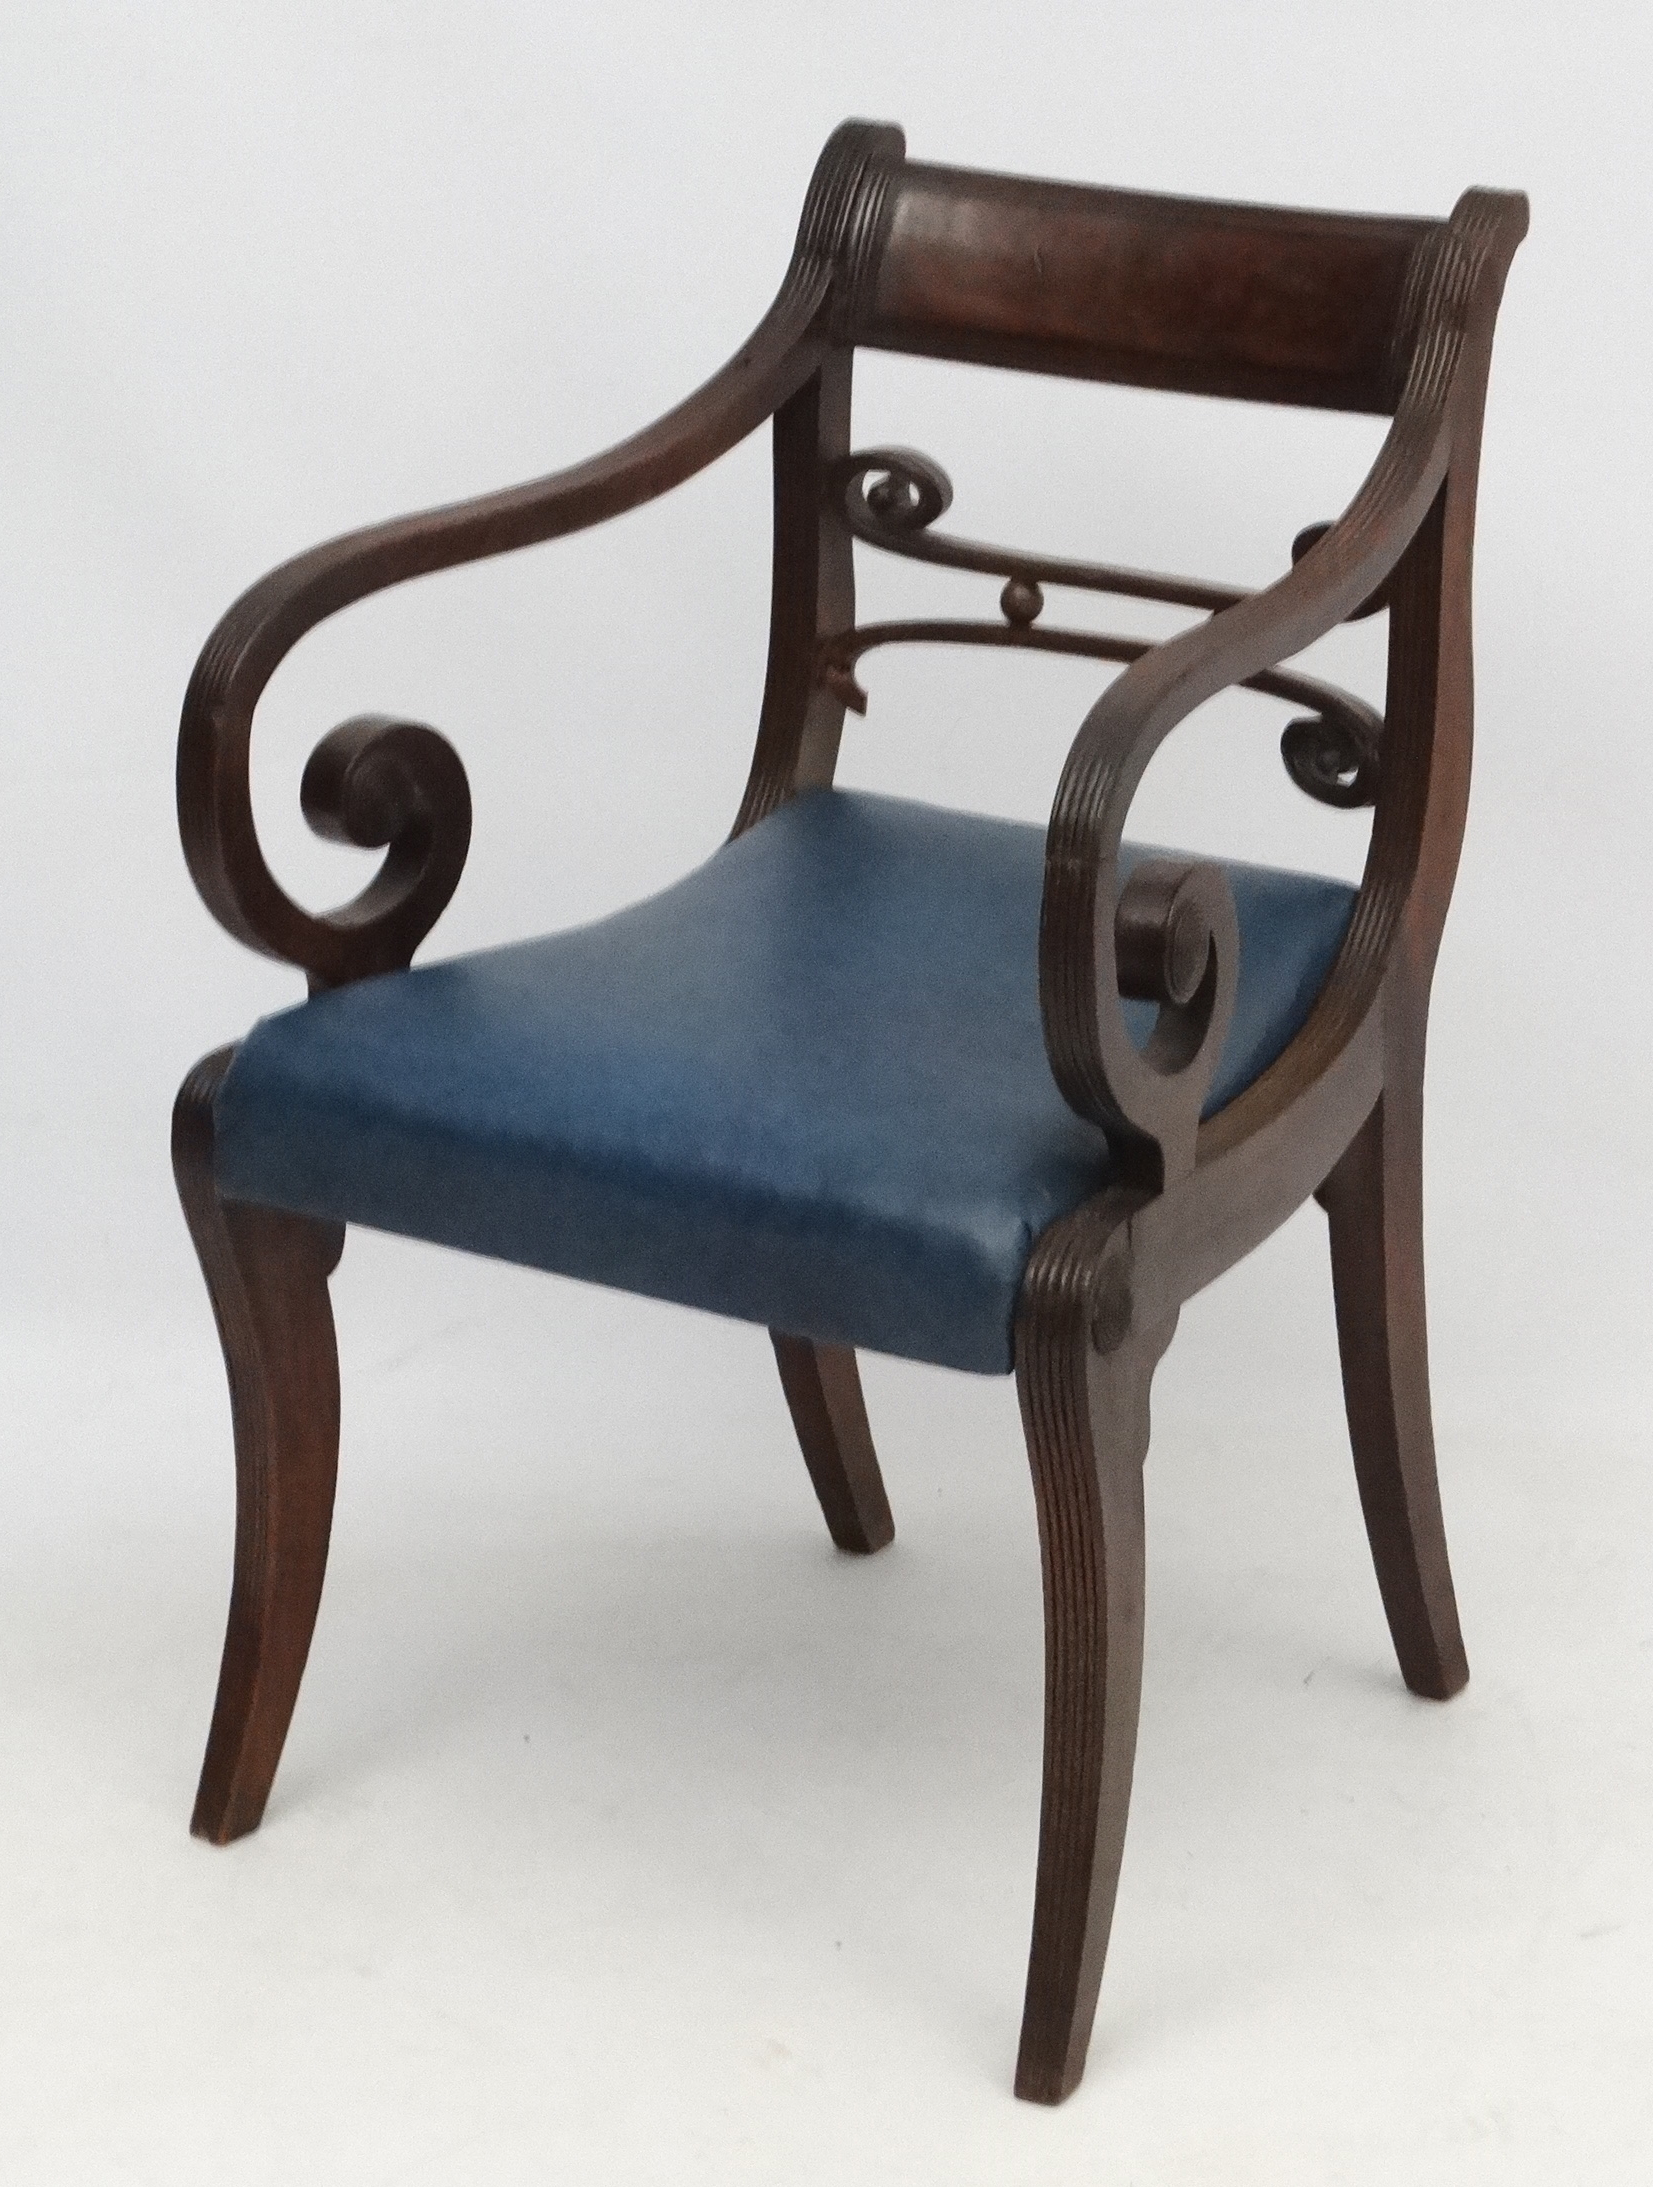 A Regency mahogany open arm / carver chair with sabre legs and drop in seats 32 1/2" high - Image 4 of 5